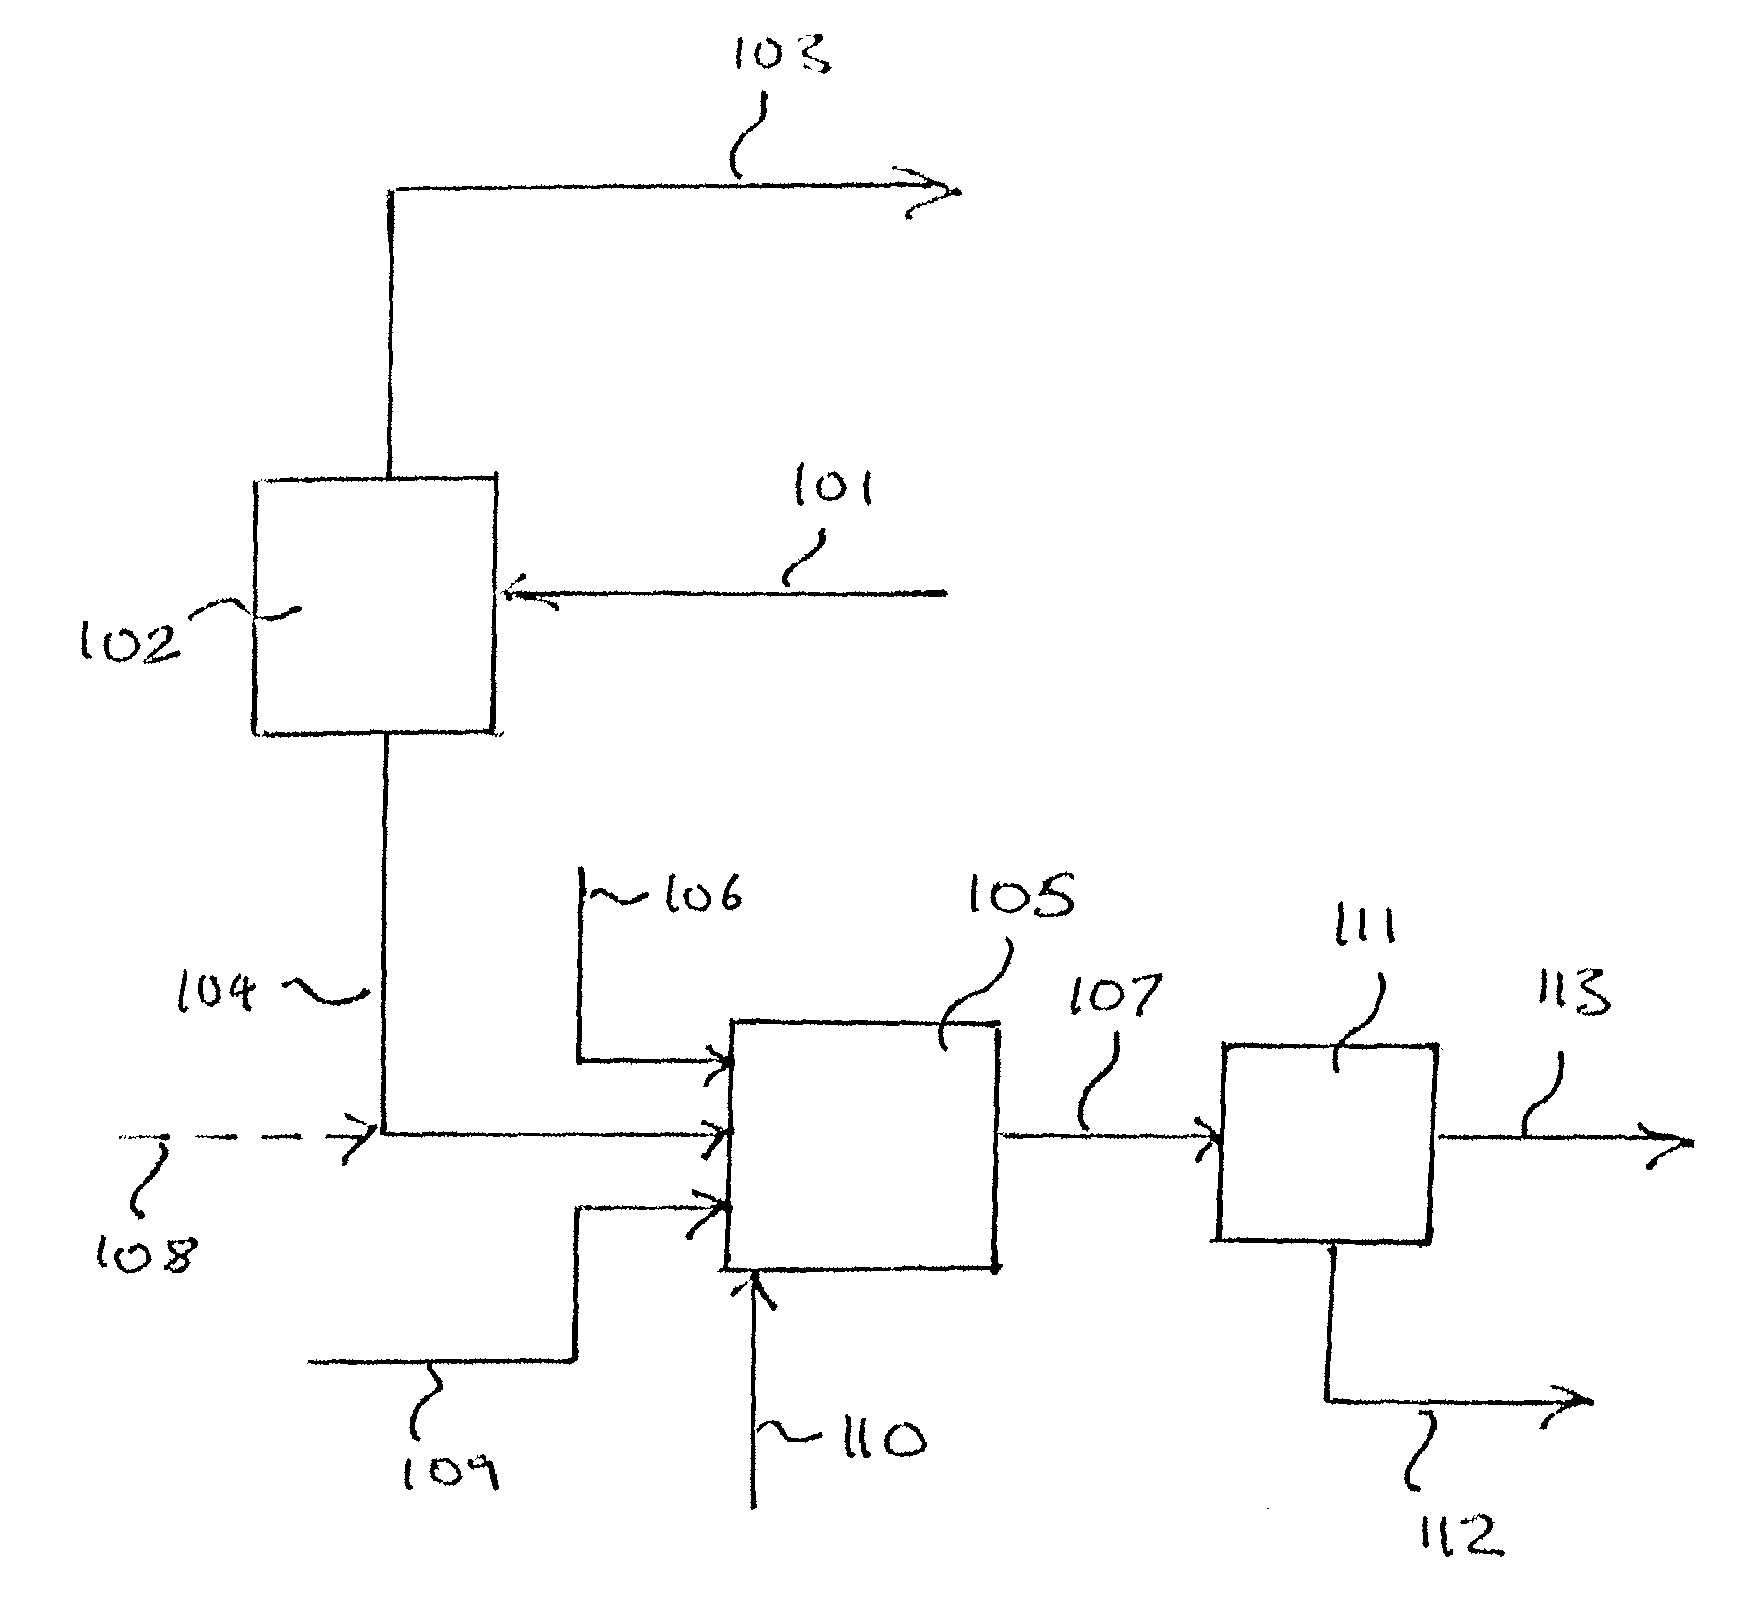 Method of treating a gaseous mixture comprising hydrogen, carbon dioxide and hydrogen sulphide